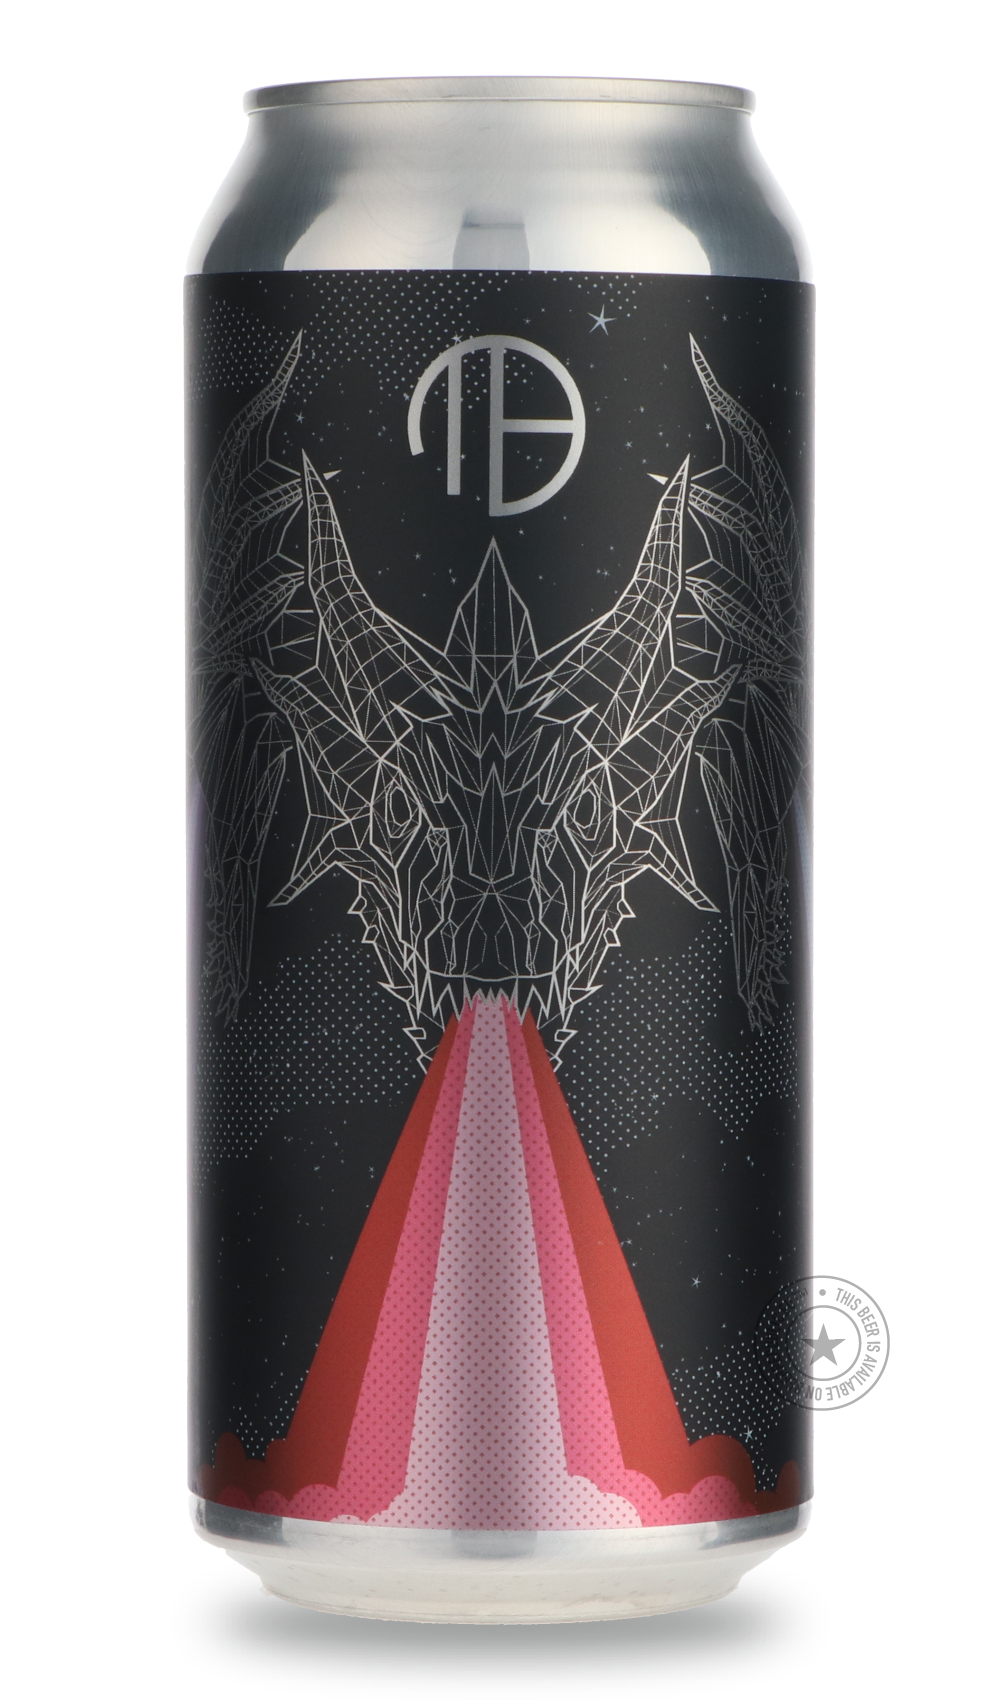 -Mortalis- Hydra | Raspberry + Blueberry + Grape-Sour / Wild & Fruity- Only @ Beer Republic - The best online beer store for American & Canadian craft beer - Buy beer online from the USA and Canada - Bier online kopen - Amerikaans bier kopen - Craft beer store - Craft beer kopen - Amerikanisch bier kaufen - Bier online kaufen - Acheter biere online - IPA - Stout - Porter - New England IPA - Hazy IPA - Imperial Stout - Barrel Aged - Barrel Aged Imperial Stout - Brown - Dark beer - Blond - Blonde - Pilsner - 